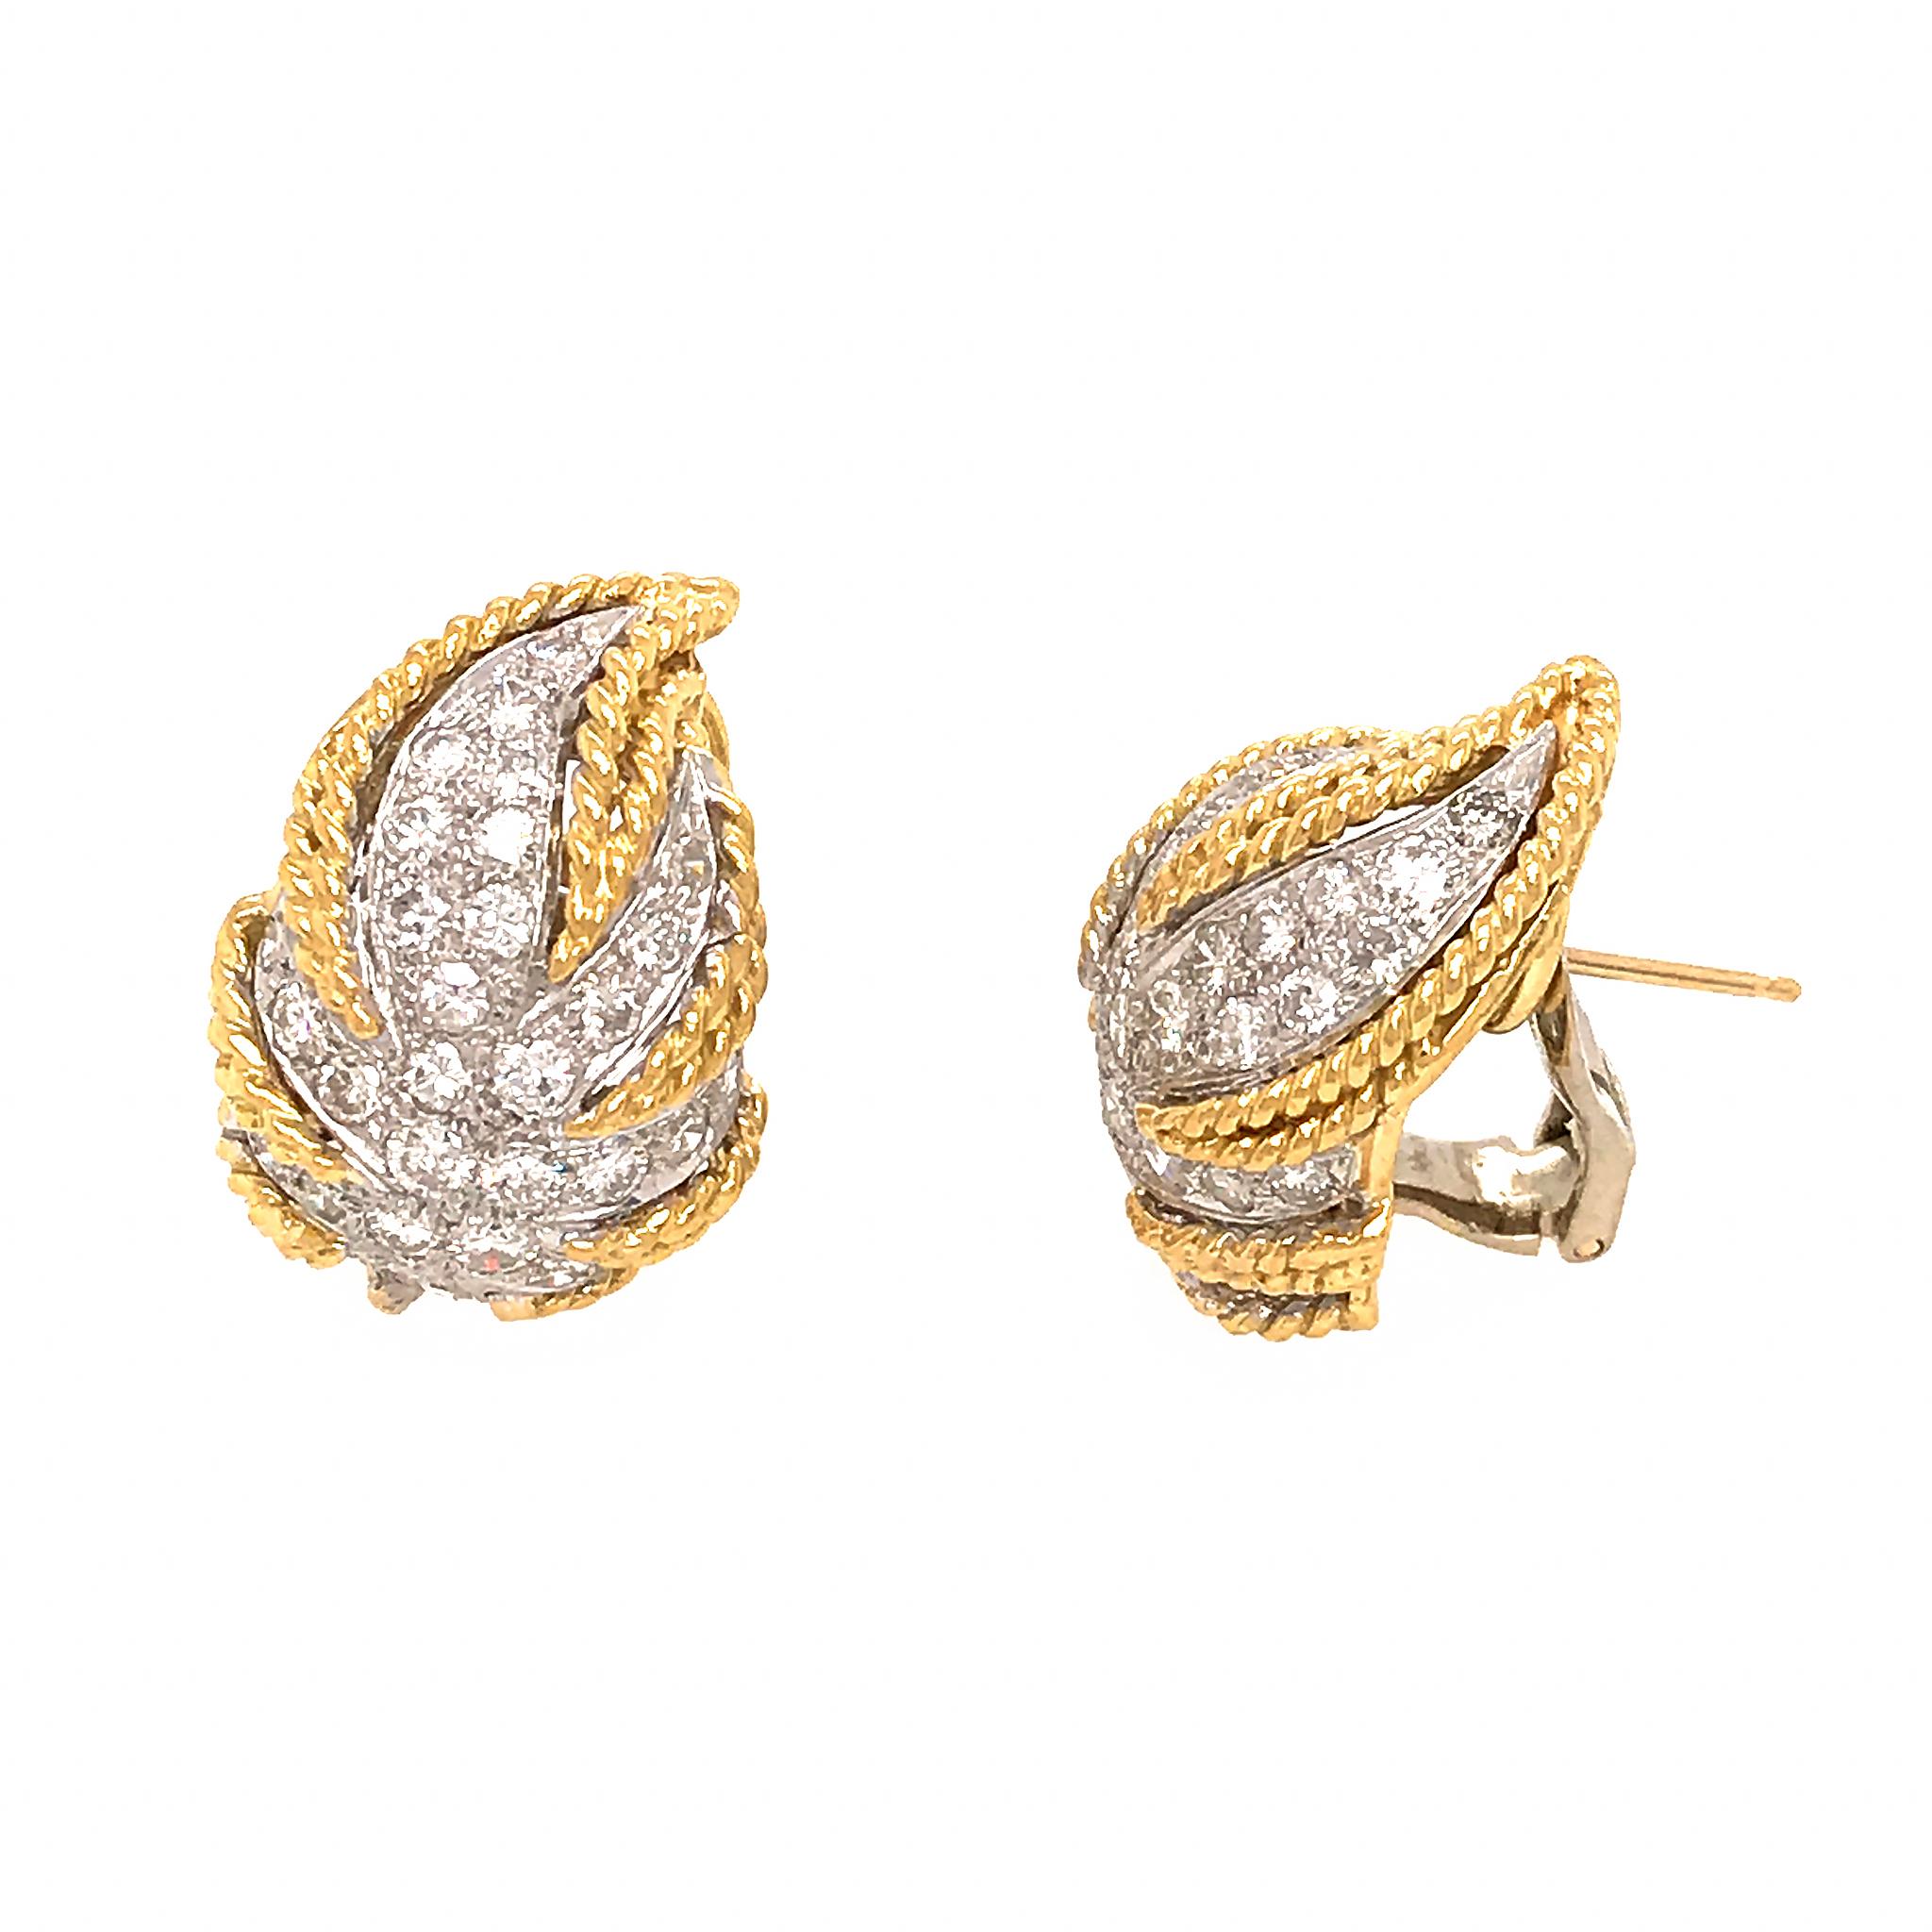 Estate 18 Karat Yellow Gold Leaf Diamond Earrings In Excellent Condition For Sale In New York, NY